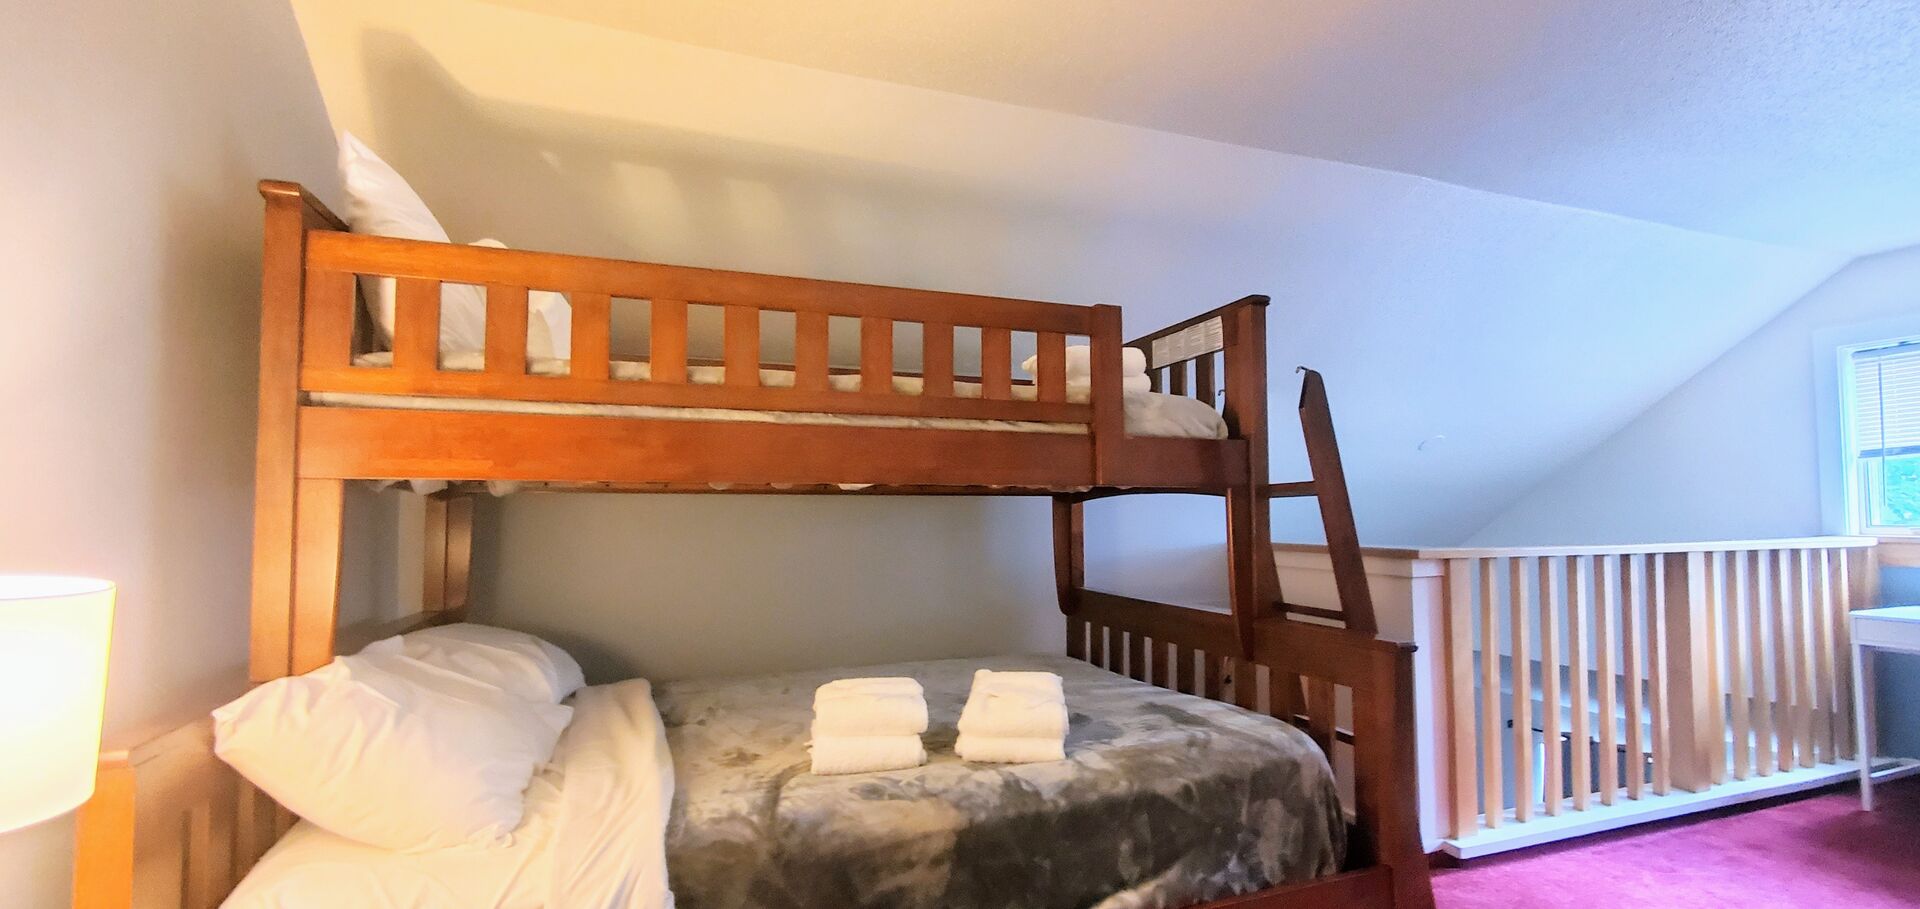 Loft with twin over queen bunk bed.